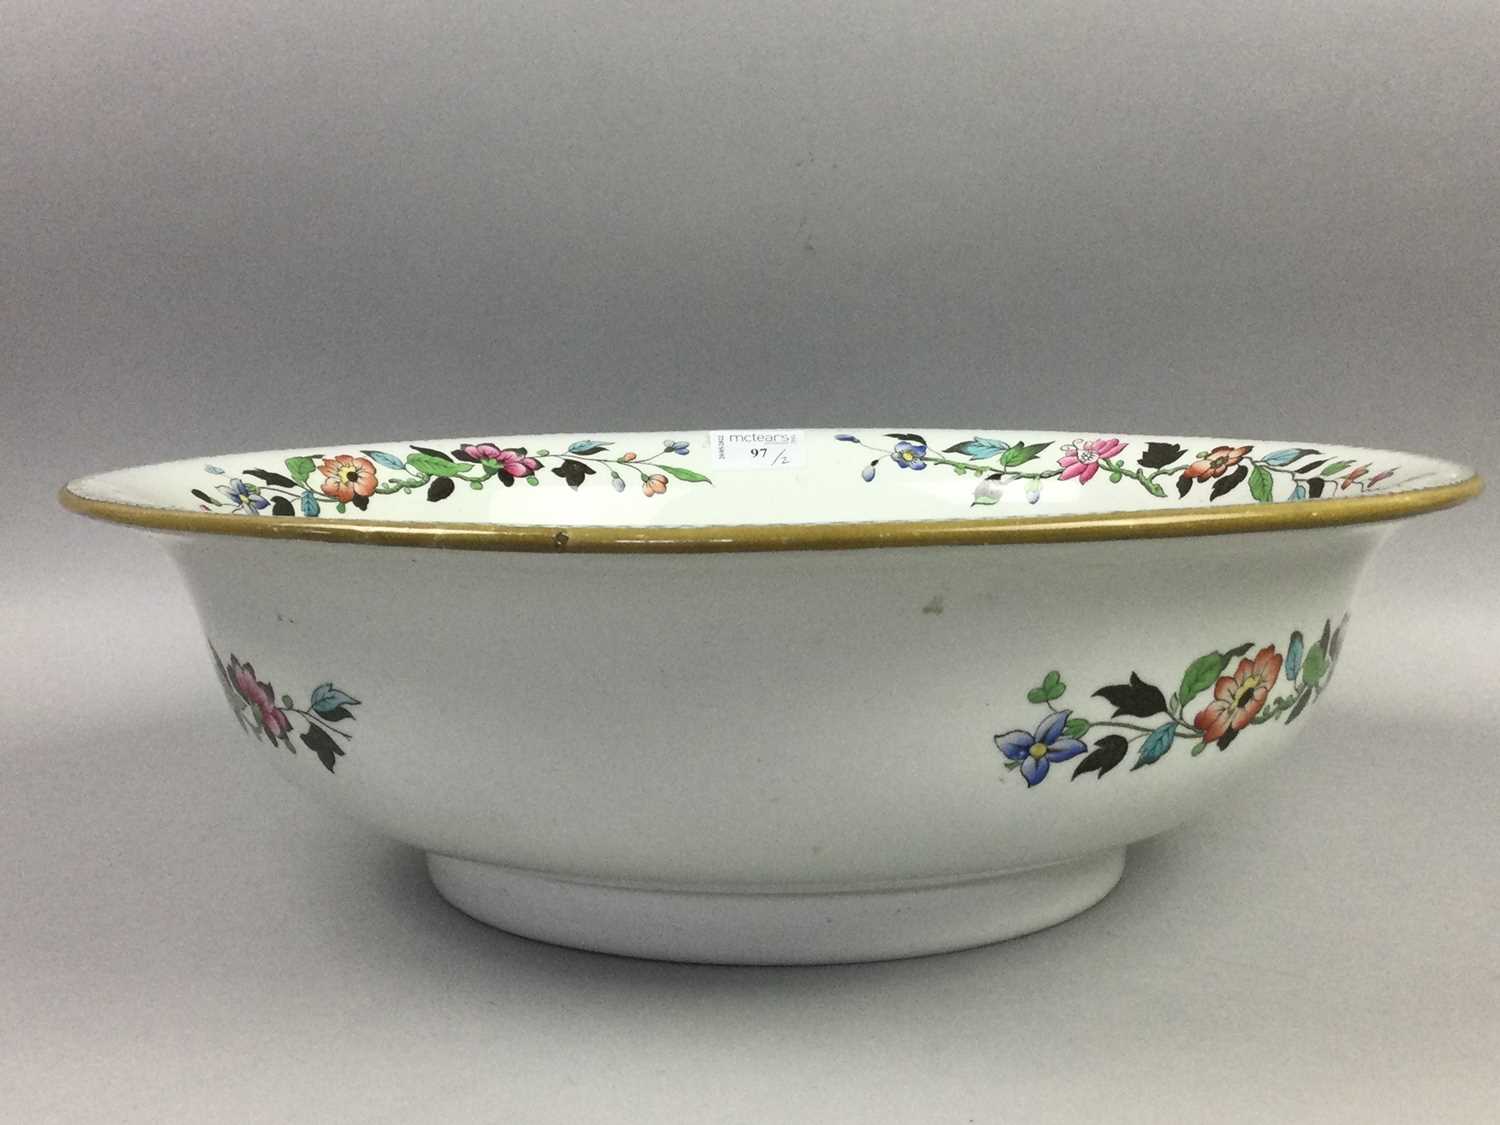 Lot 97 - A COPELAND SPODE WASH BASIN AND A BOWL